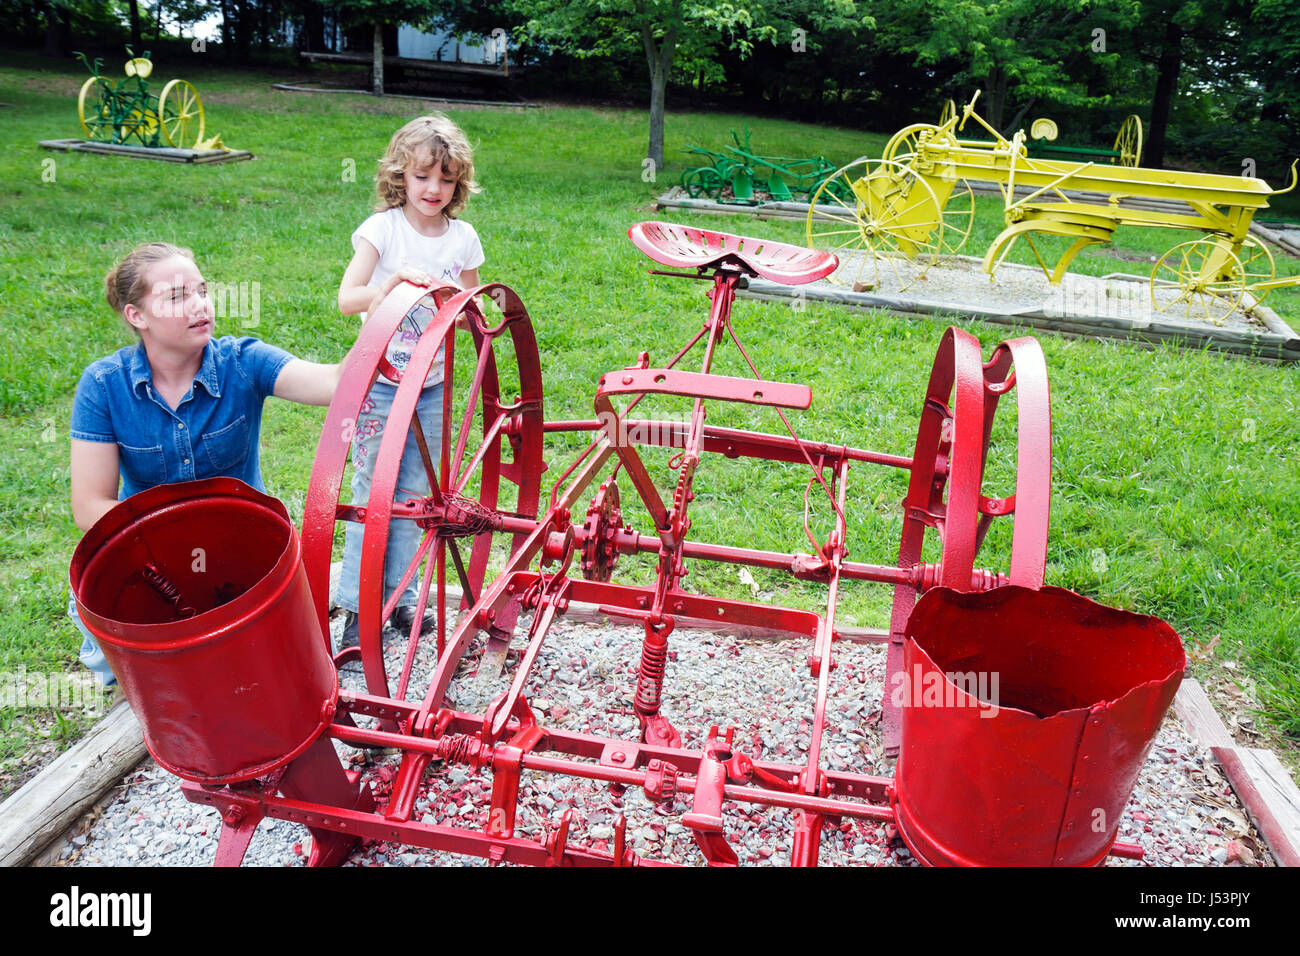 Arkansas Maynard,Maynard Pioneer Museum and Park,antique farm equipment,regional heritage,girl girls,youngster youngsters youth youths female kid kids Stock Photo